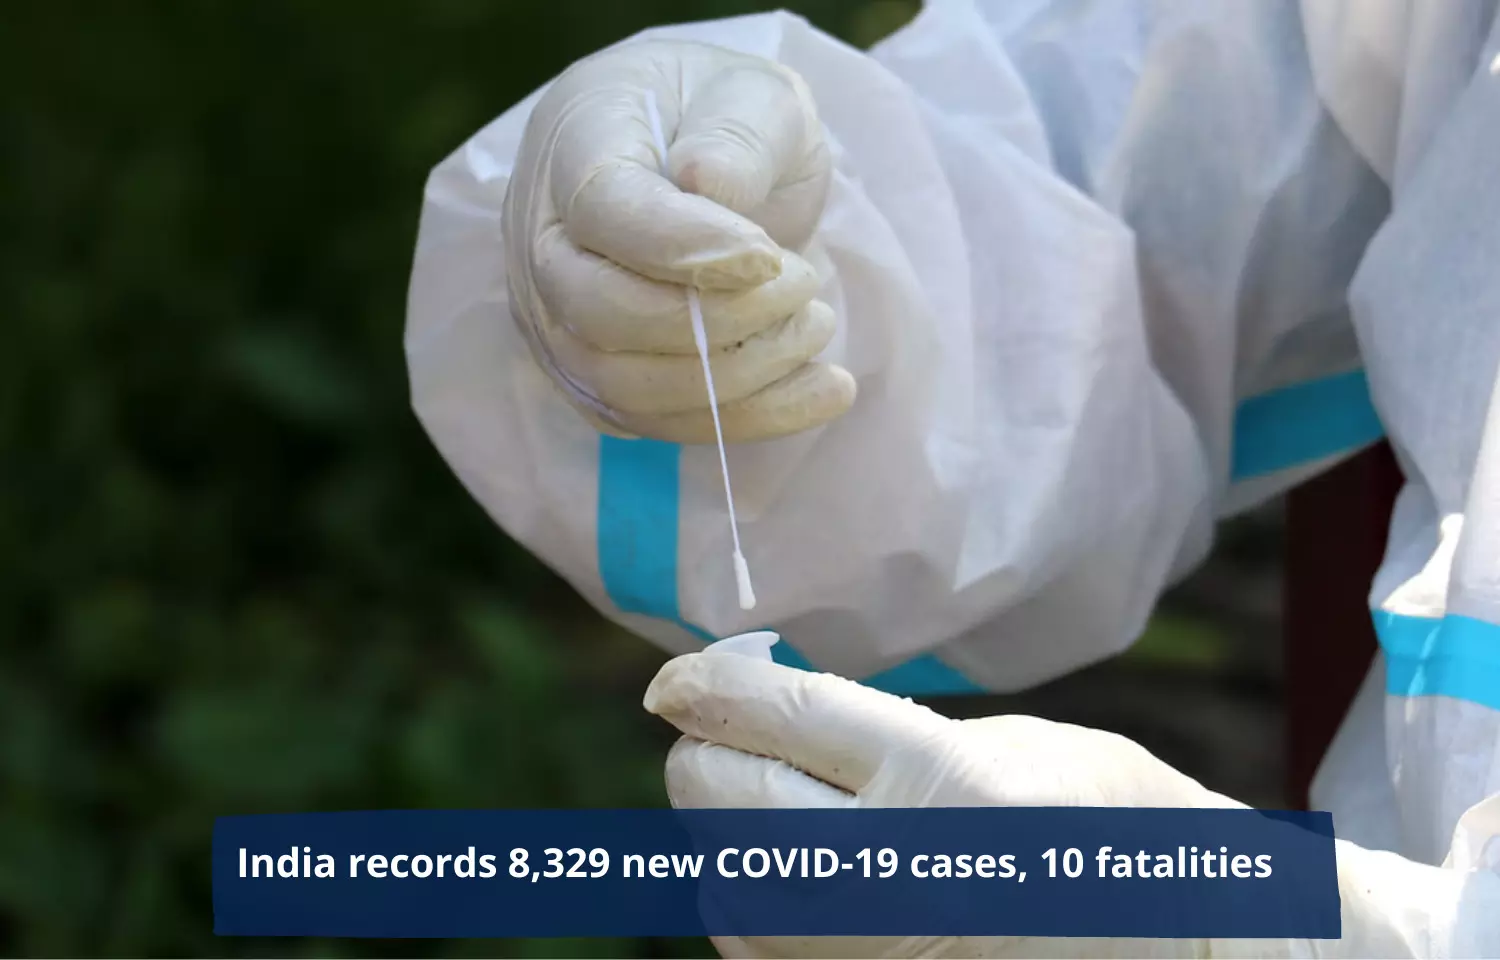 India records 8,329 new COVID-19 cases, 10 fatalities